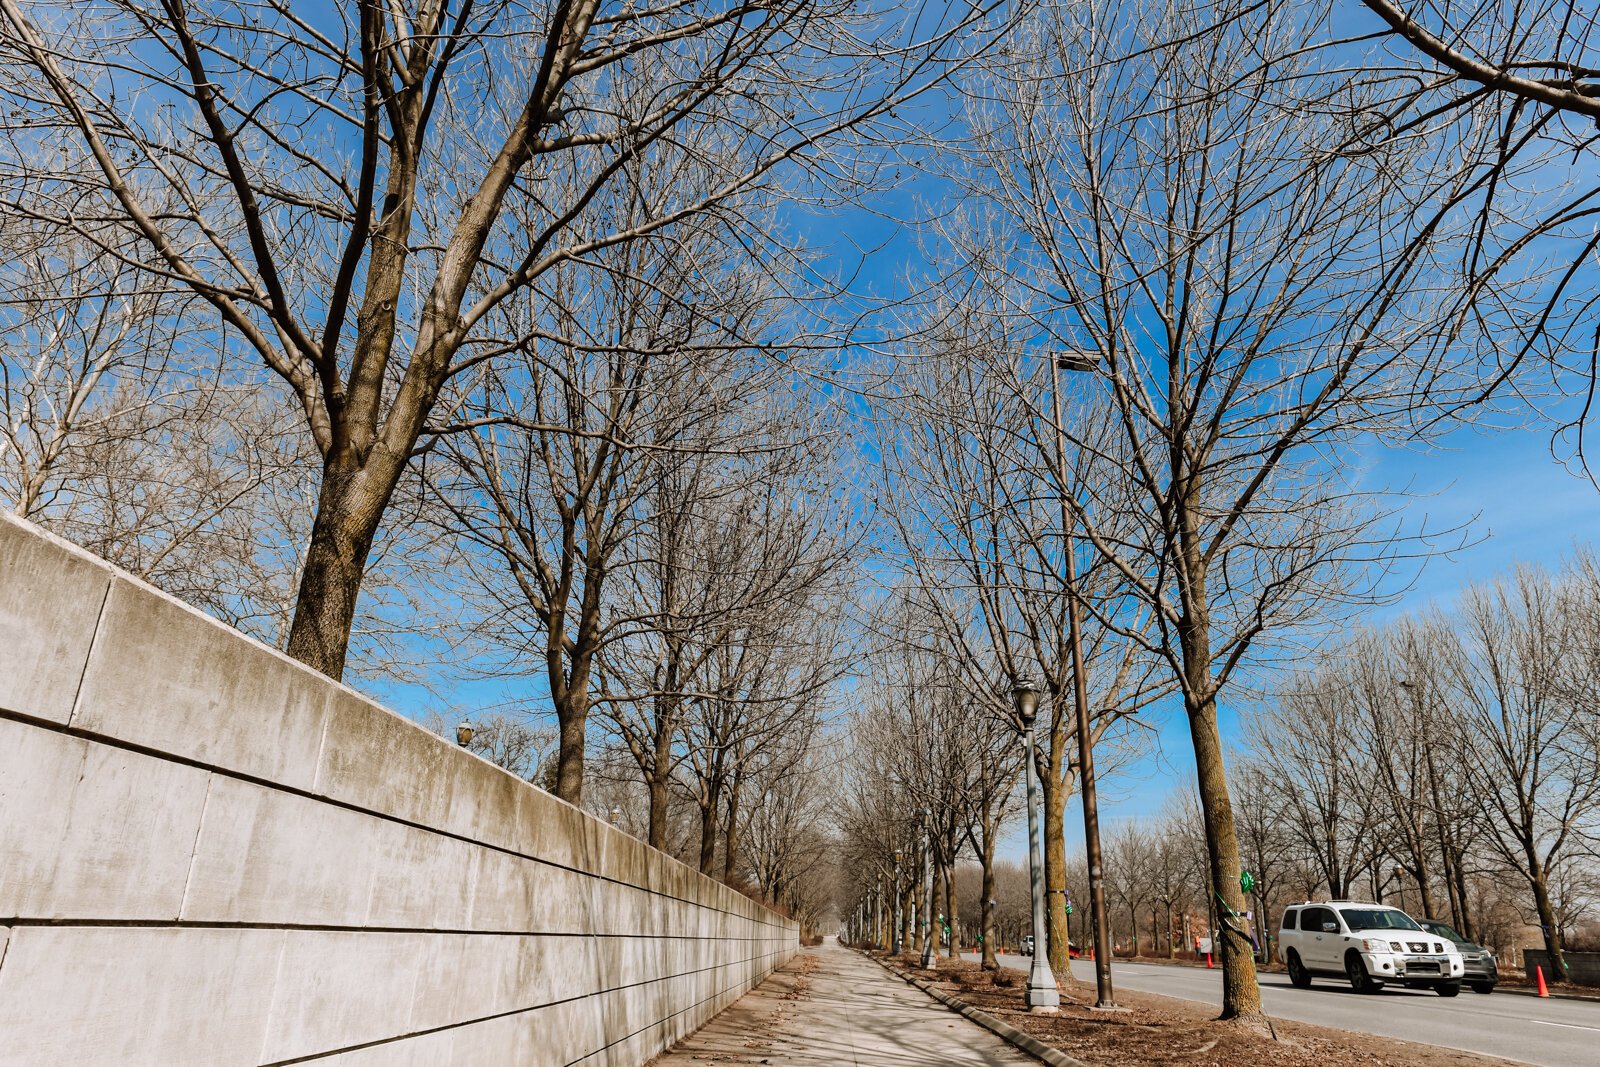 Street trees in Downtown Fort Wayne contribute to the city's tree canopy.